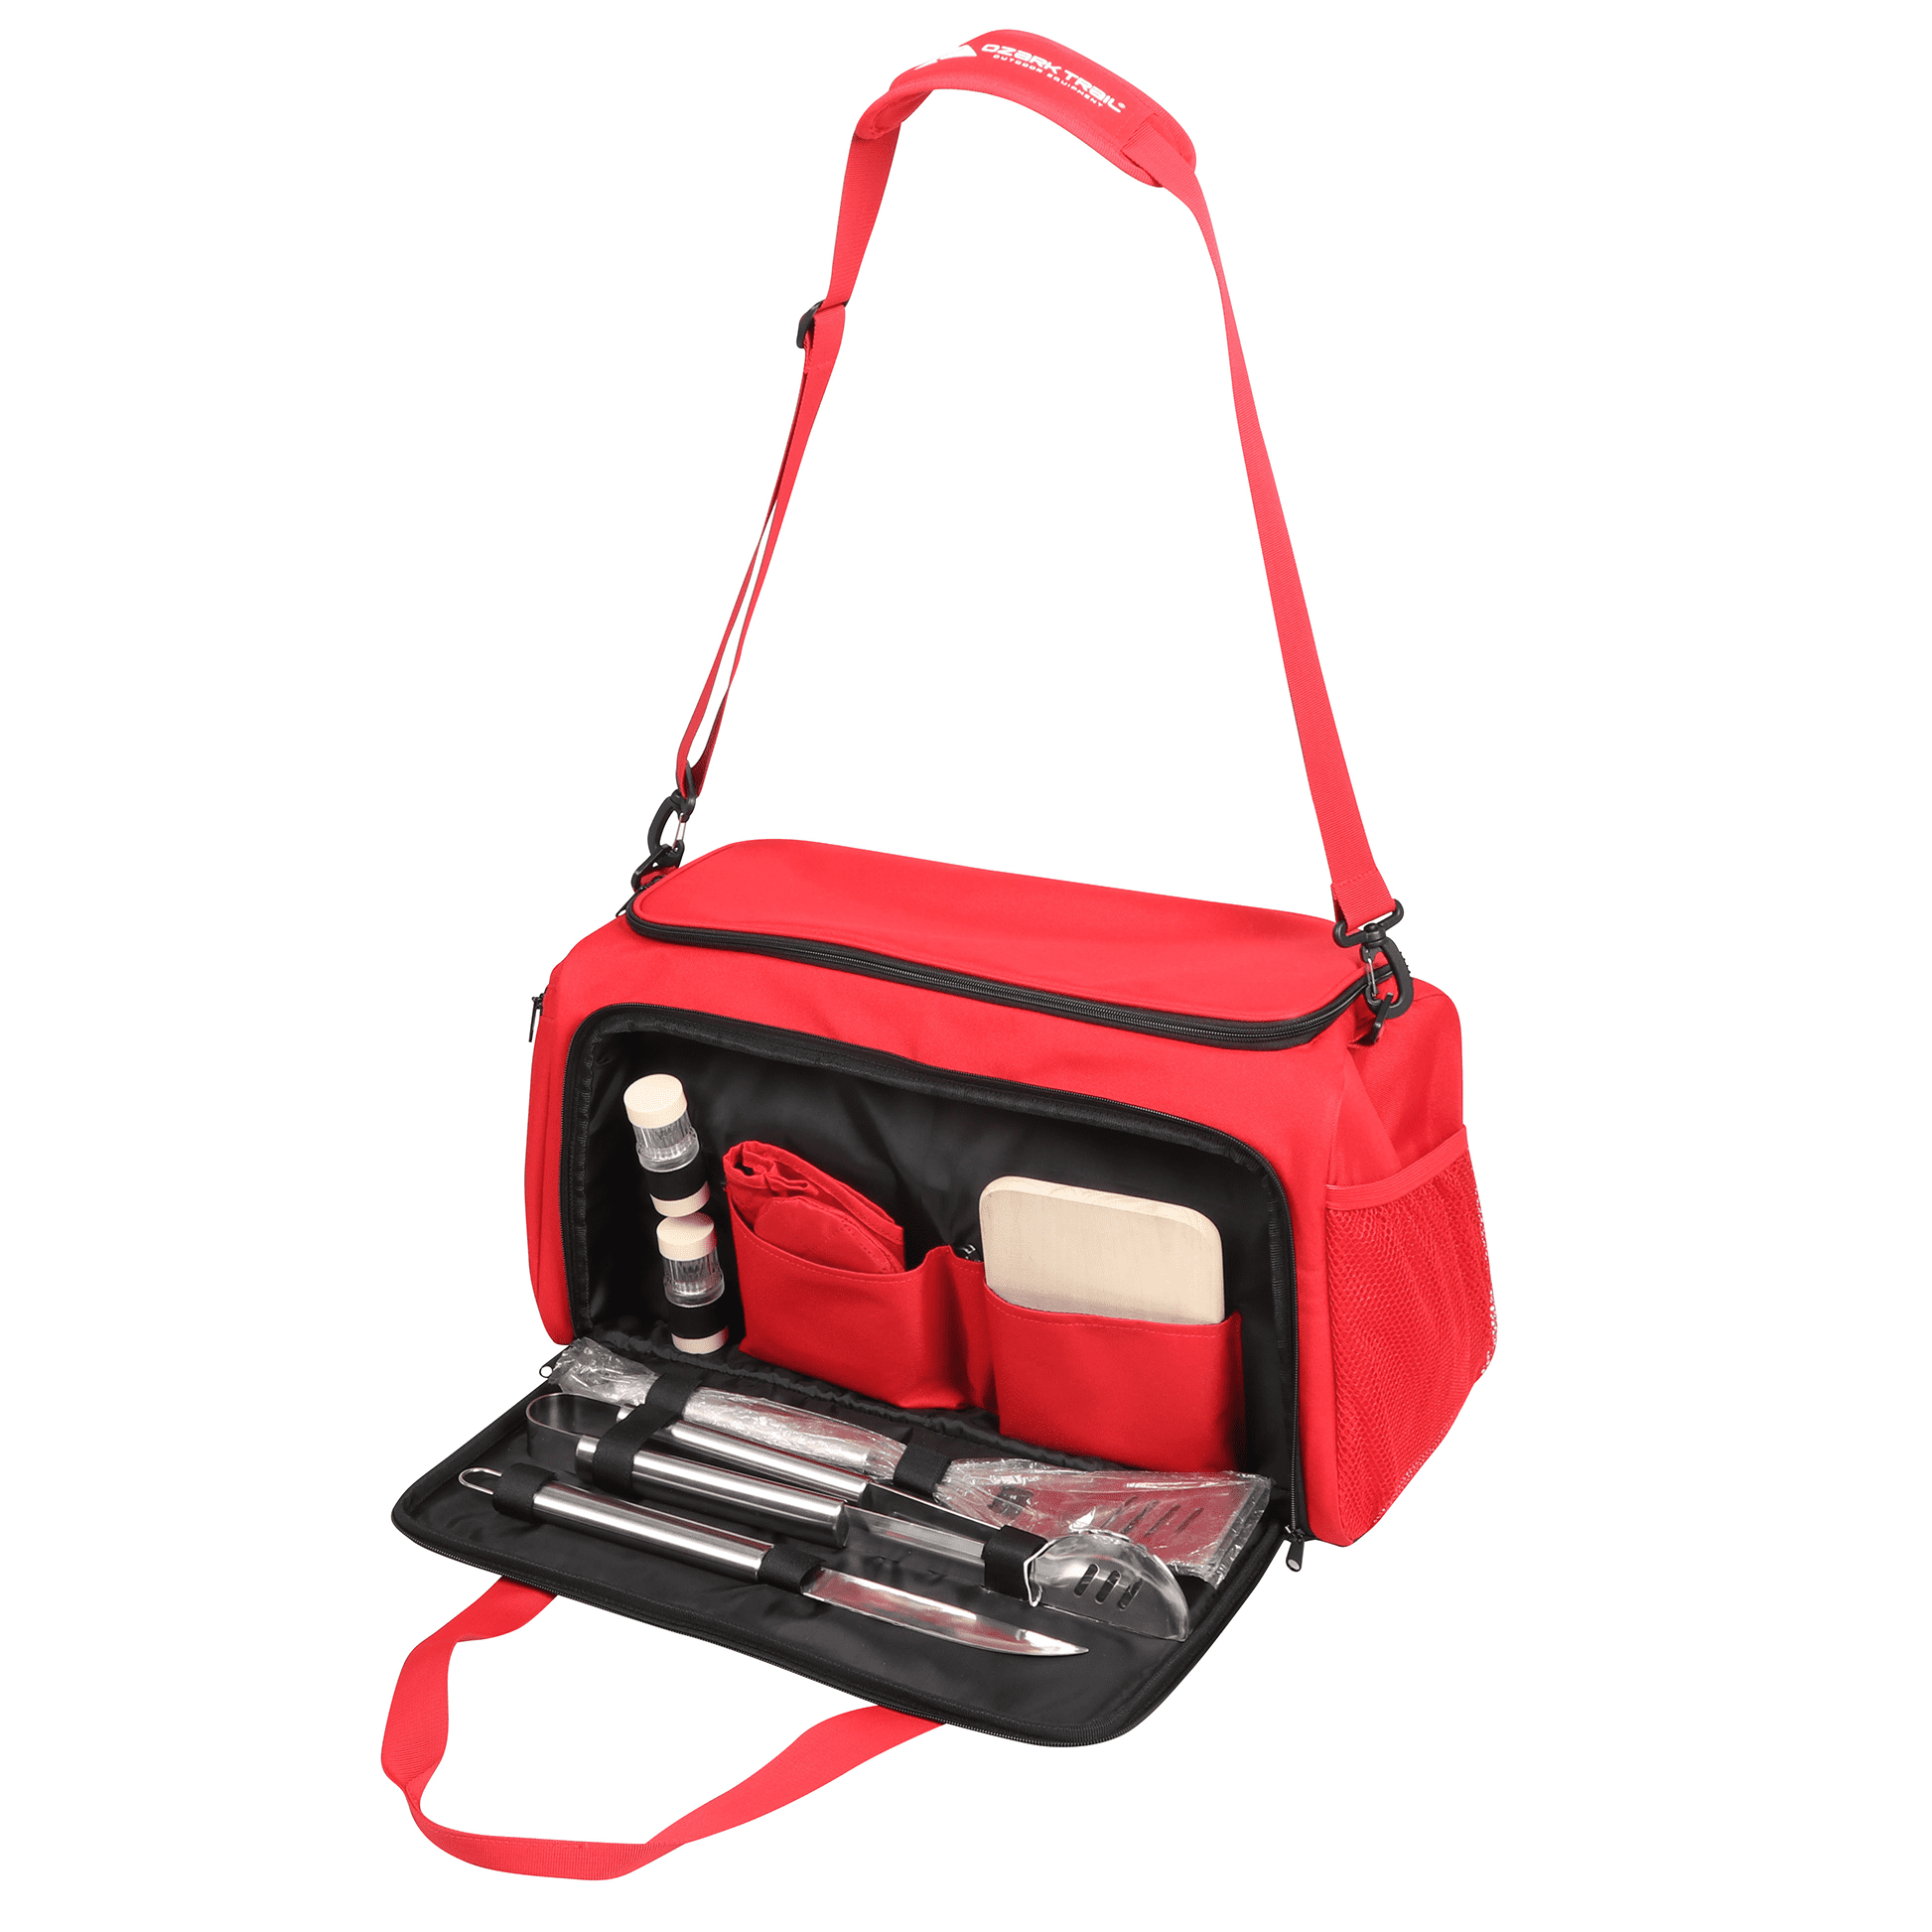 Ozark Trail Soft Sided Tailgate Cooler with Utensils, Red